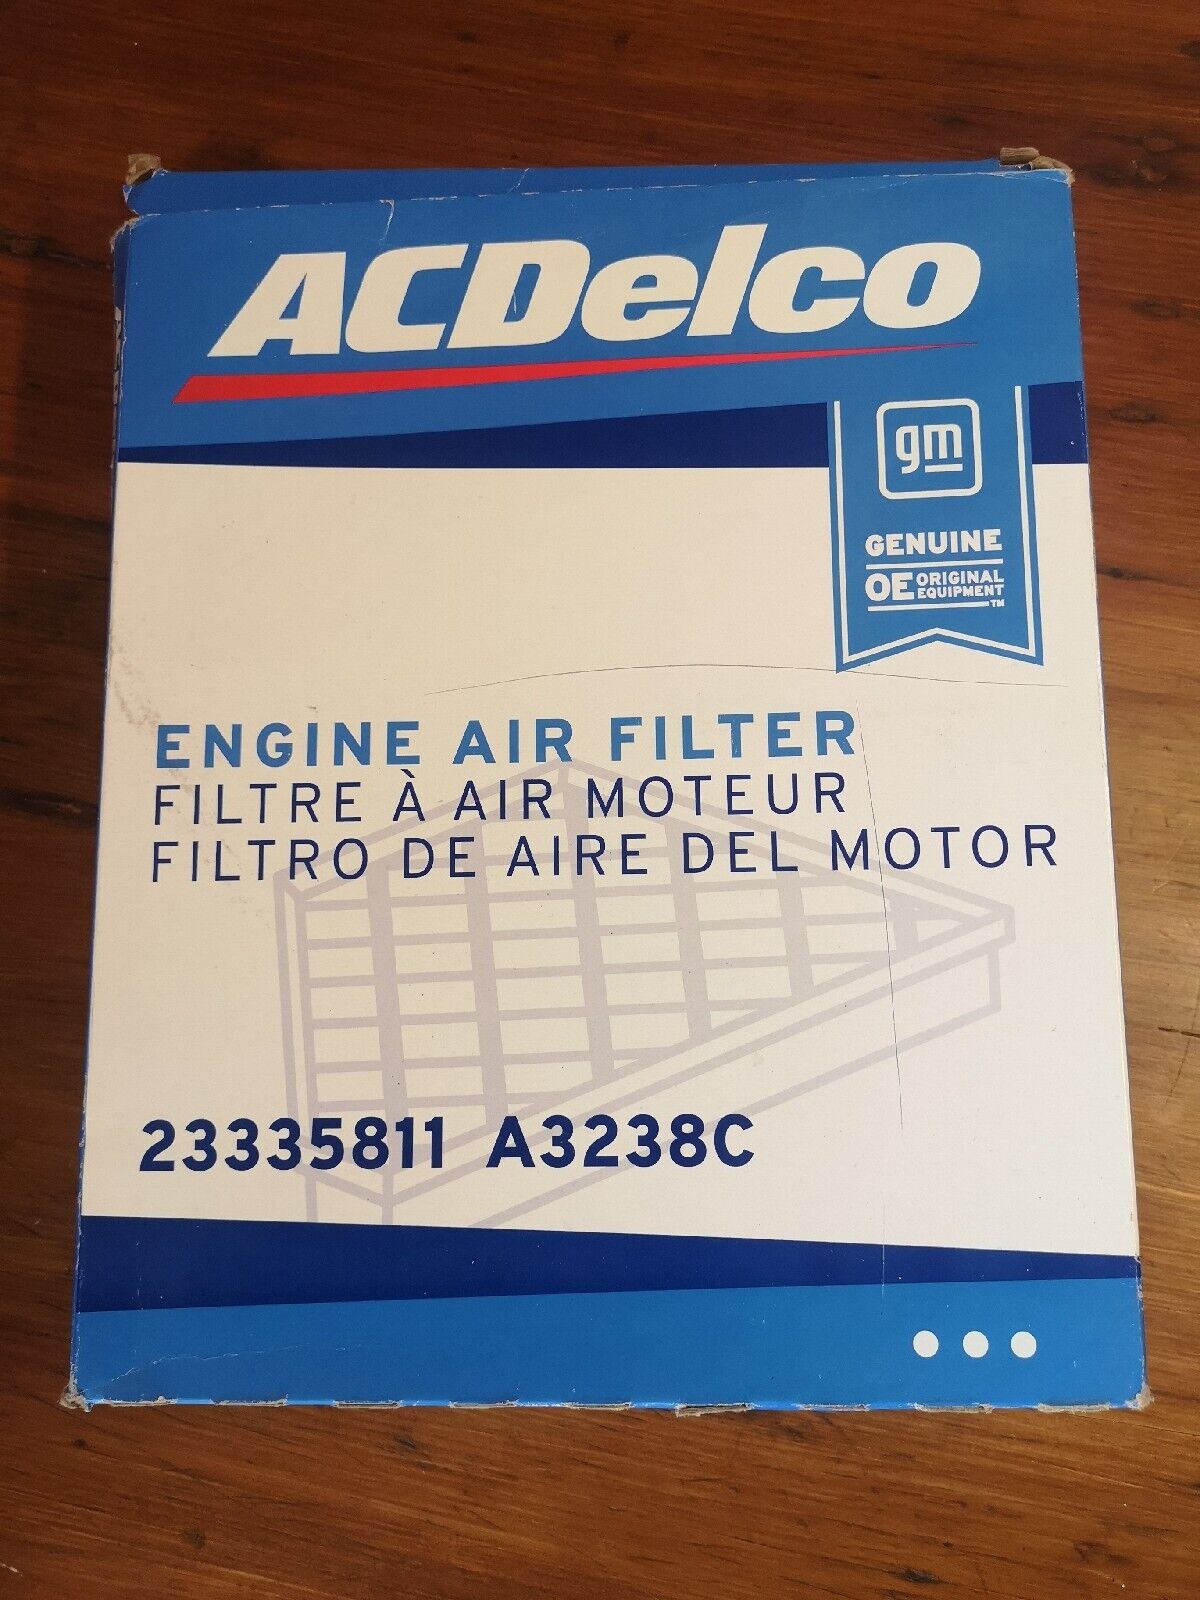 ACDelco Genuine Engine Air Filter A3238C 23335811 Brand New